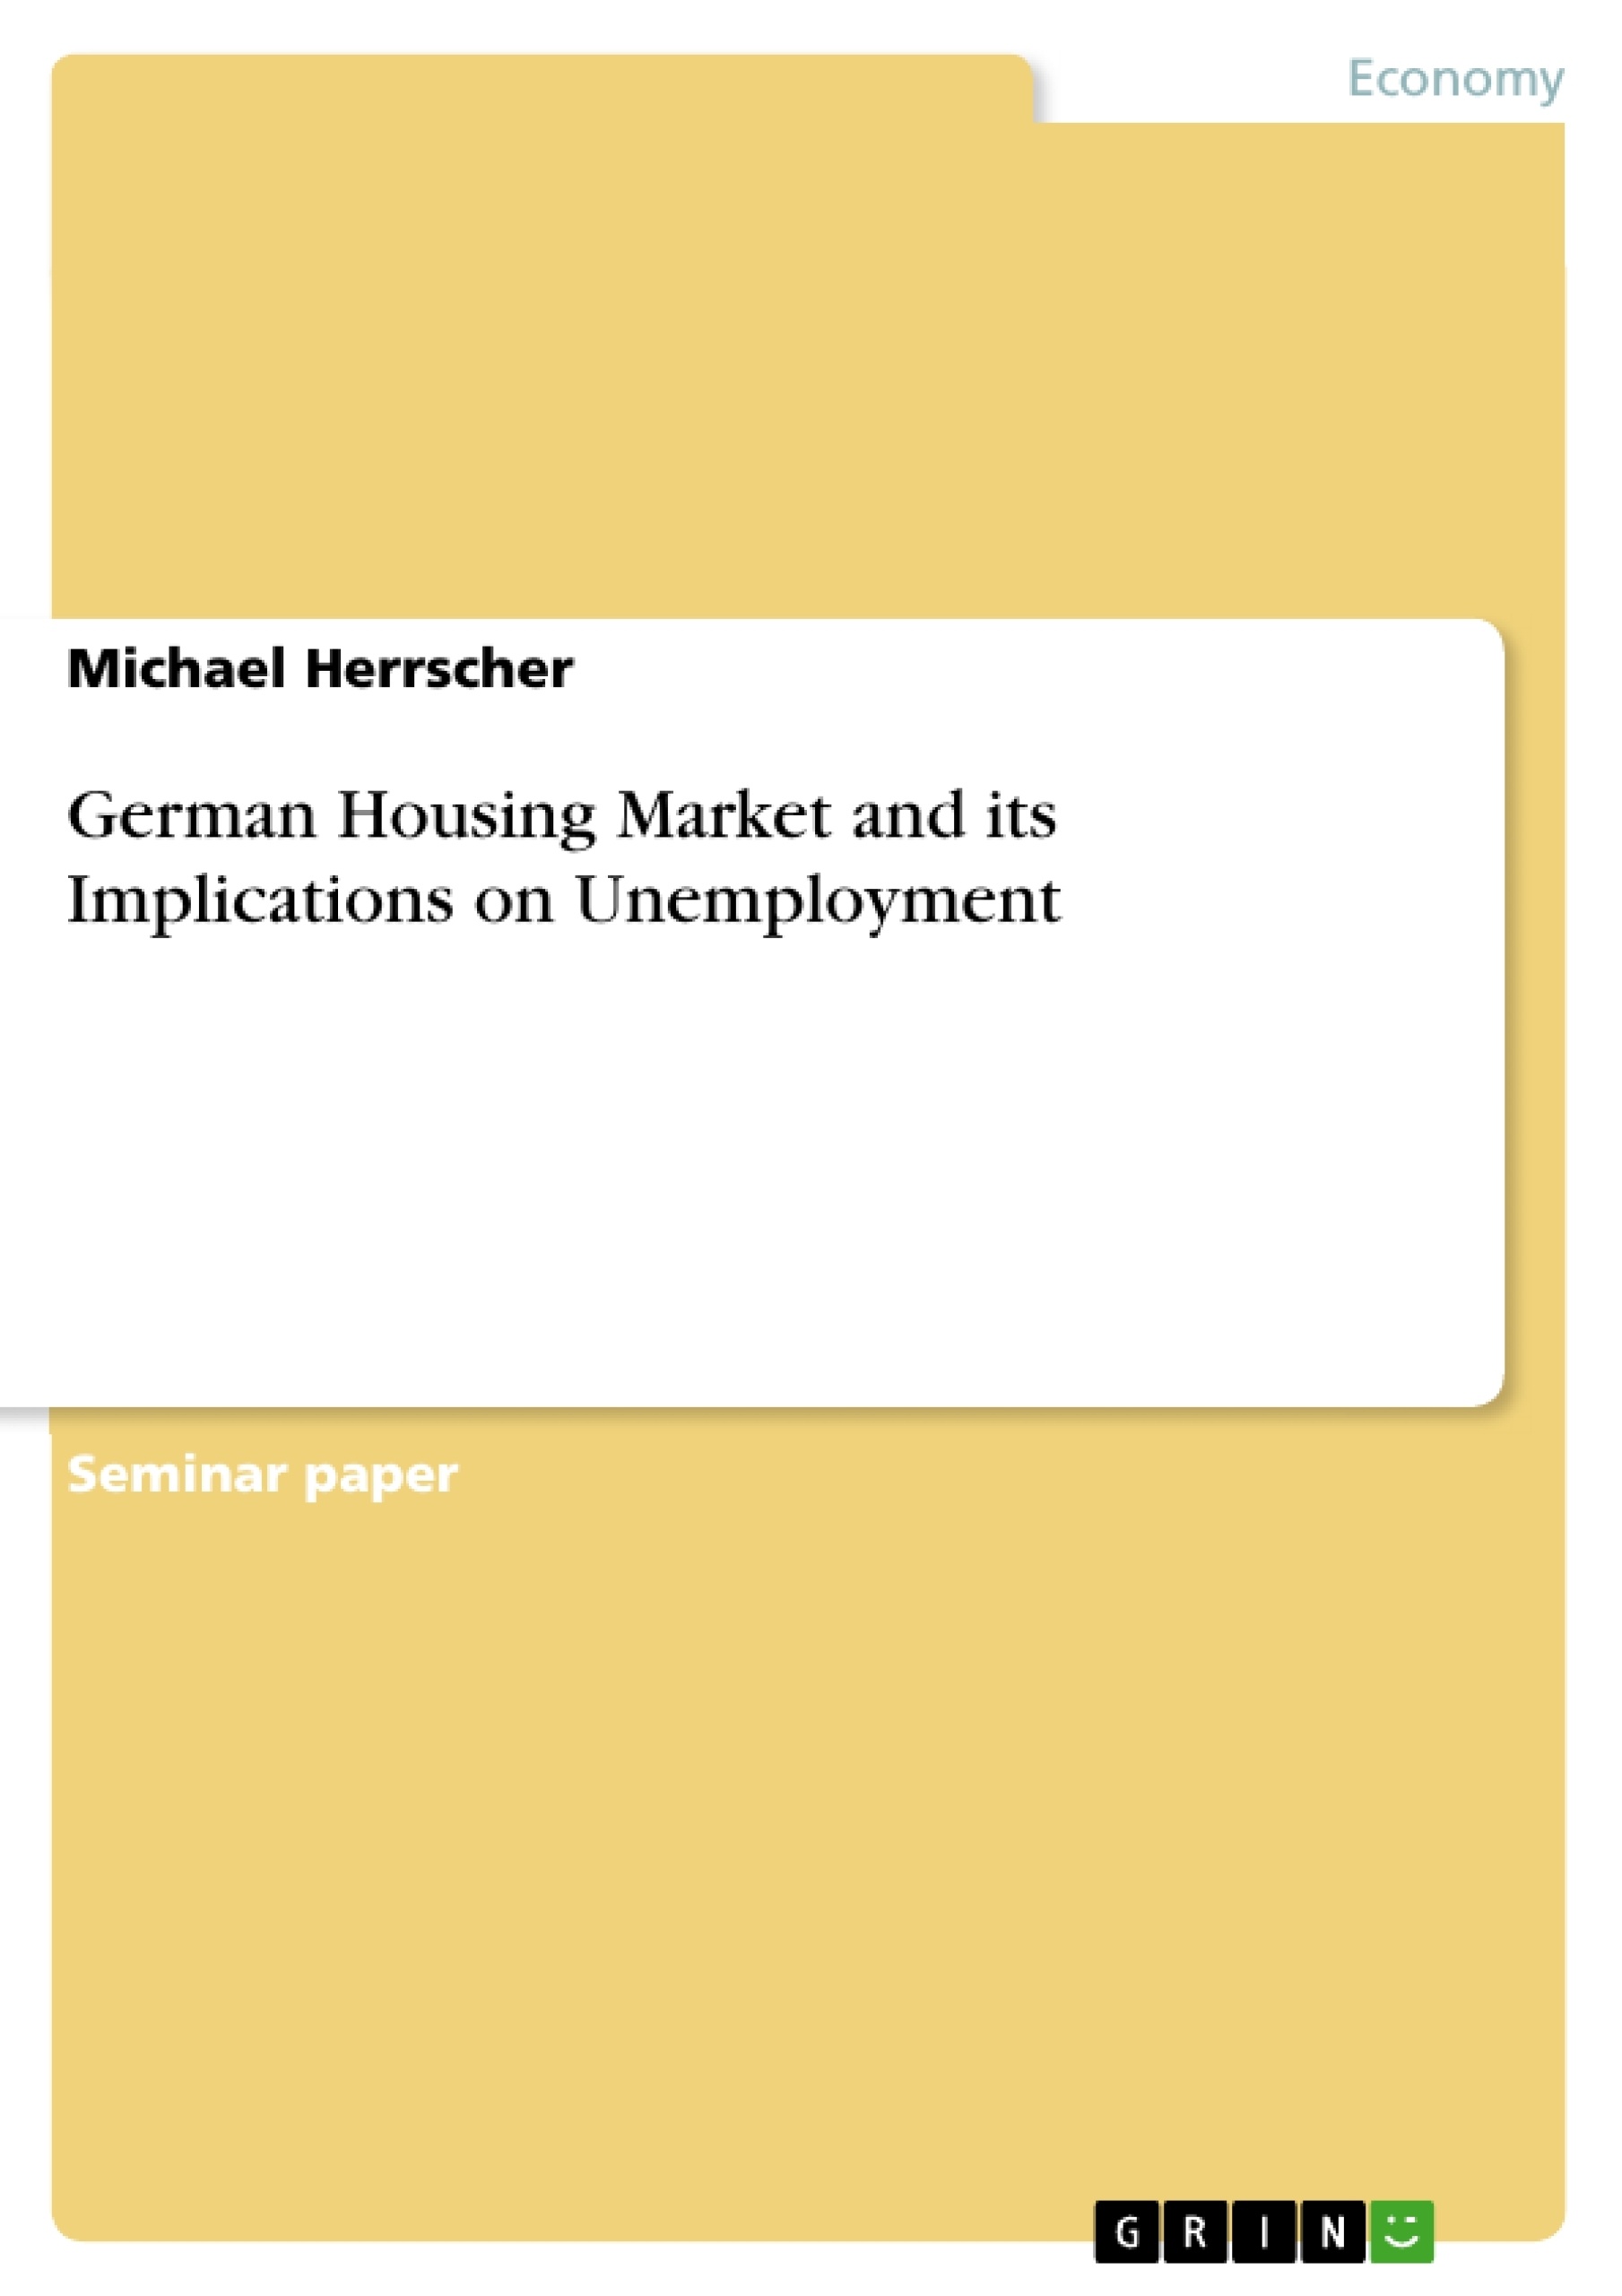 Title: German Housing Market and its Implications on Unemployment